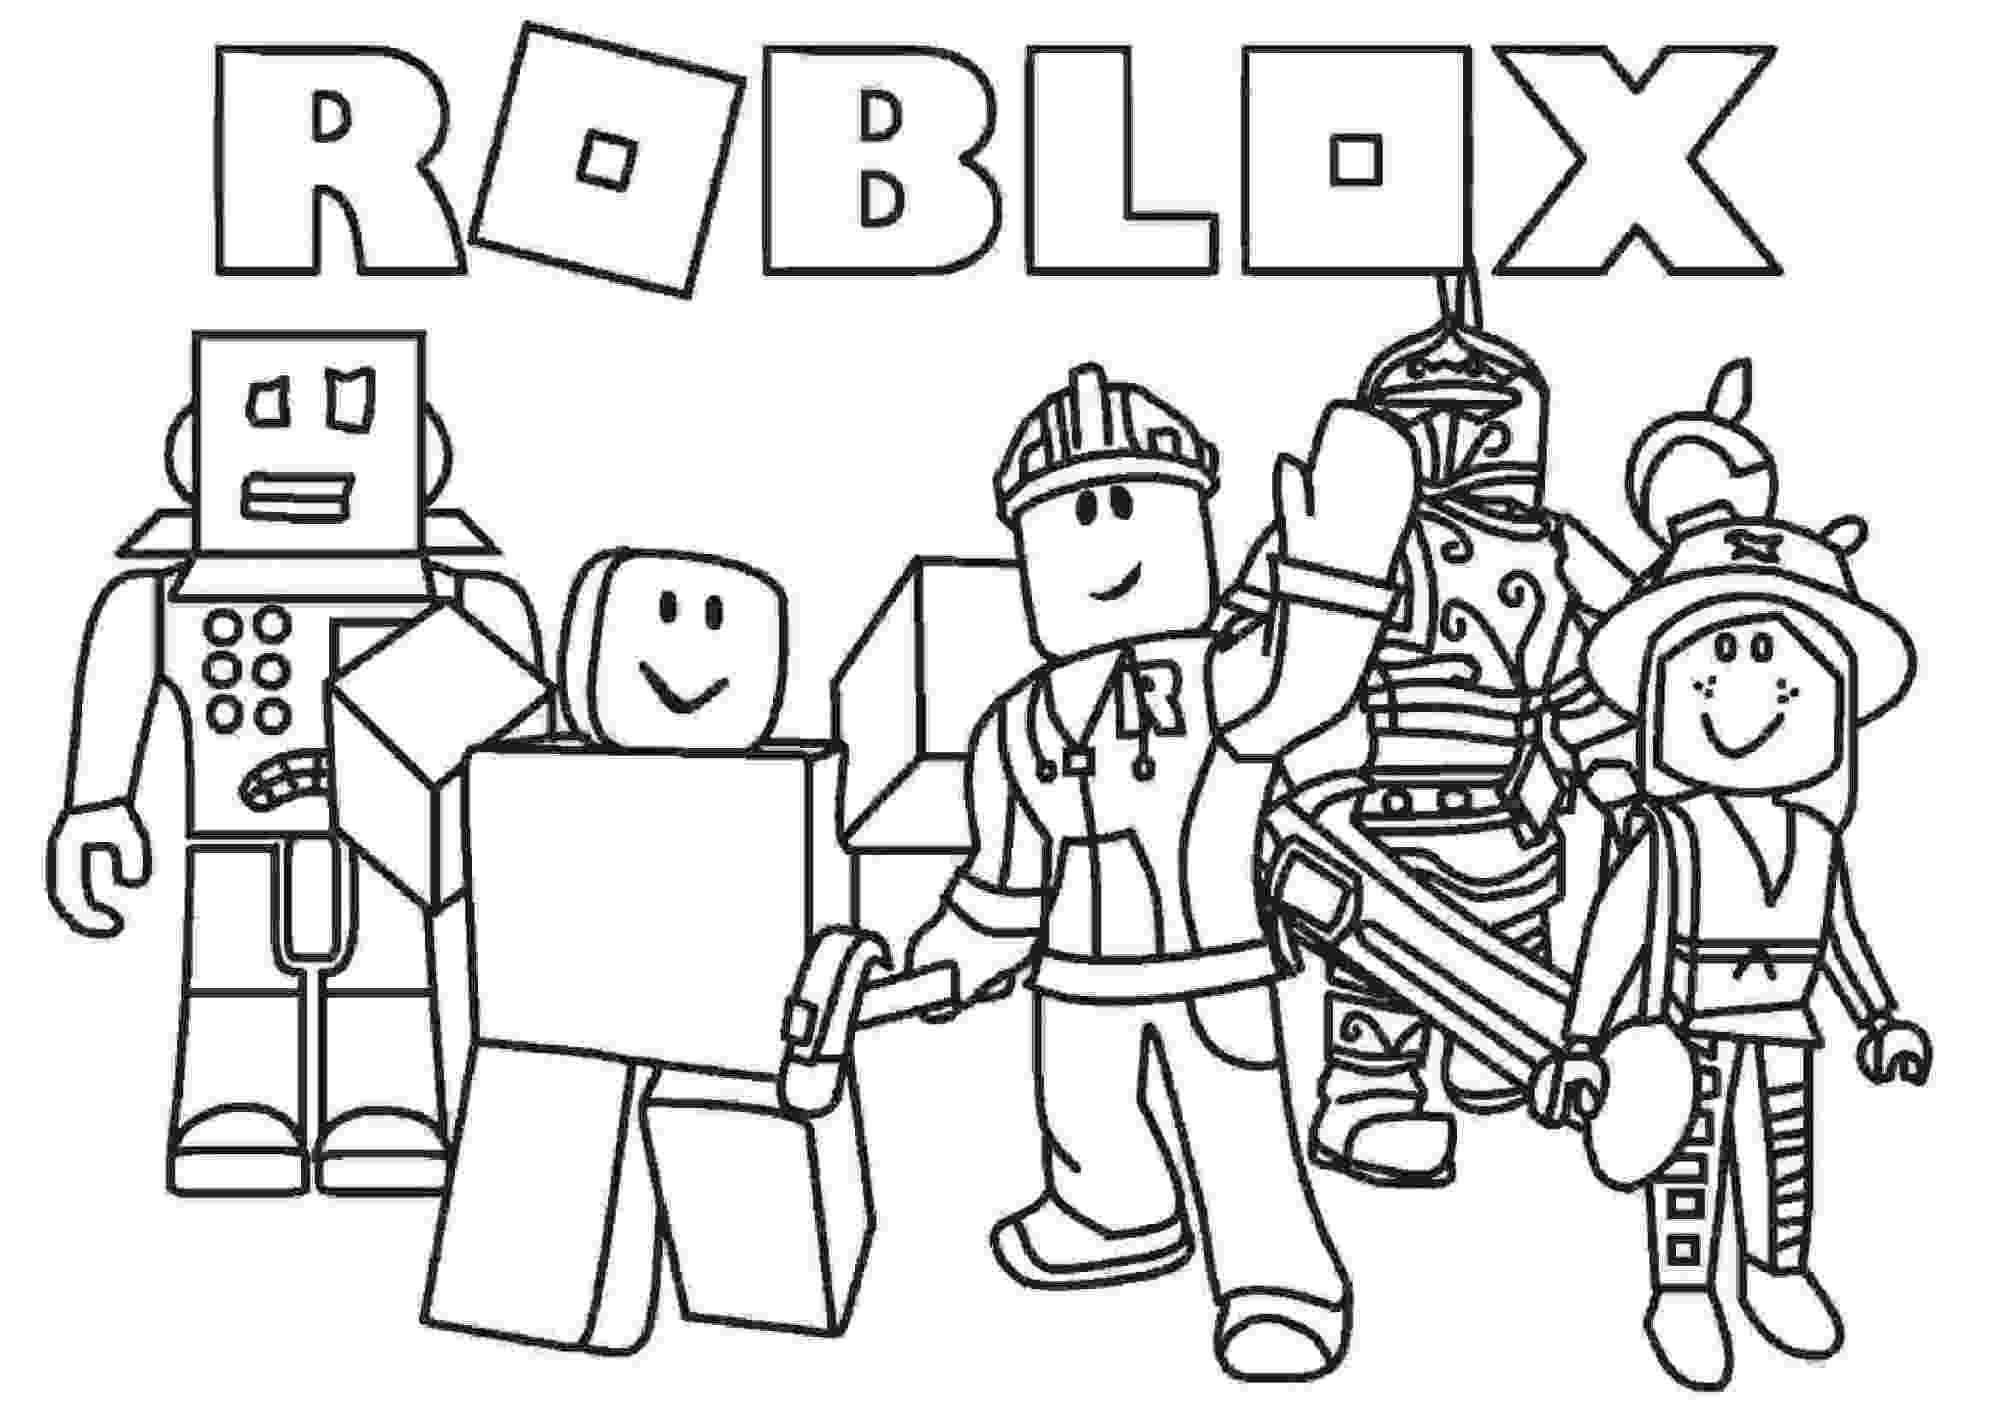 Roblox team protects the earth Coloring Pages   Lego Coloring ...